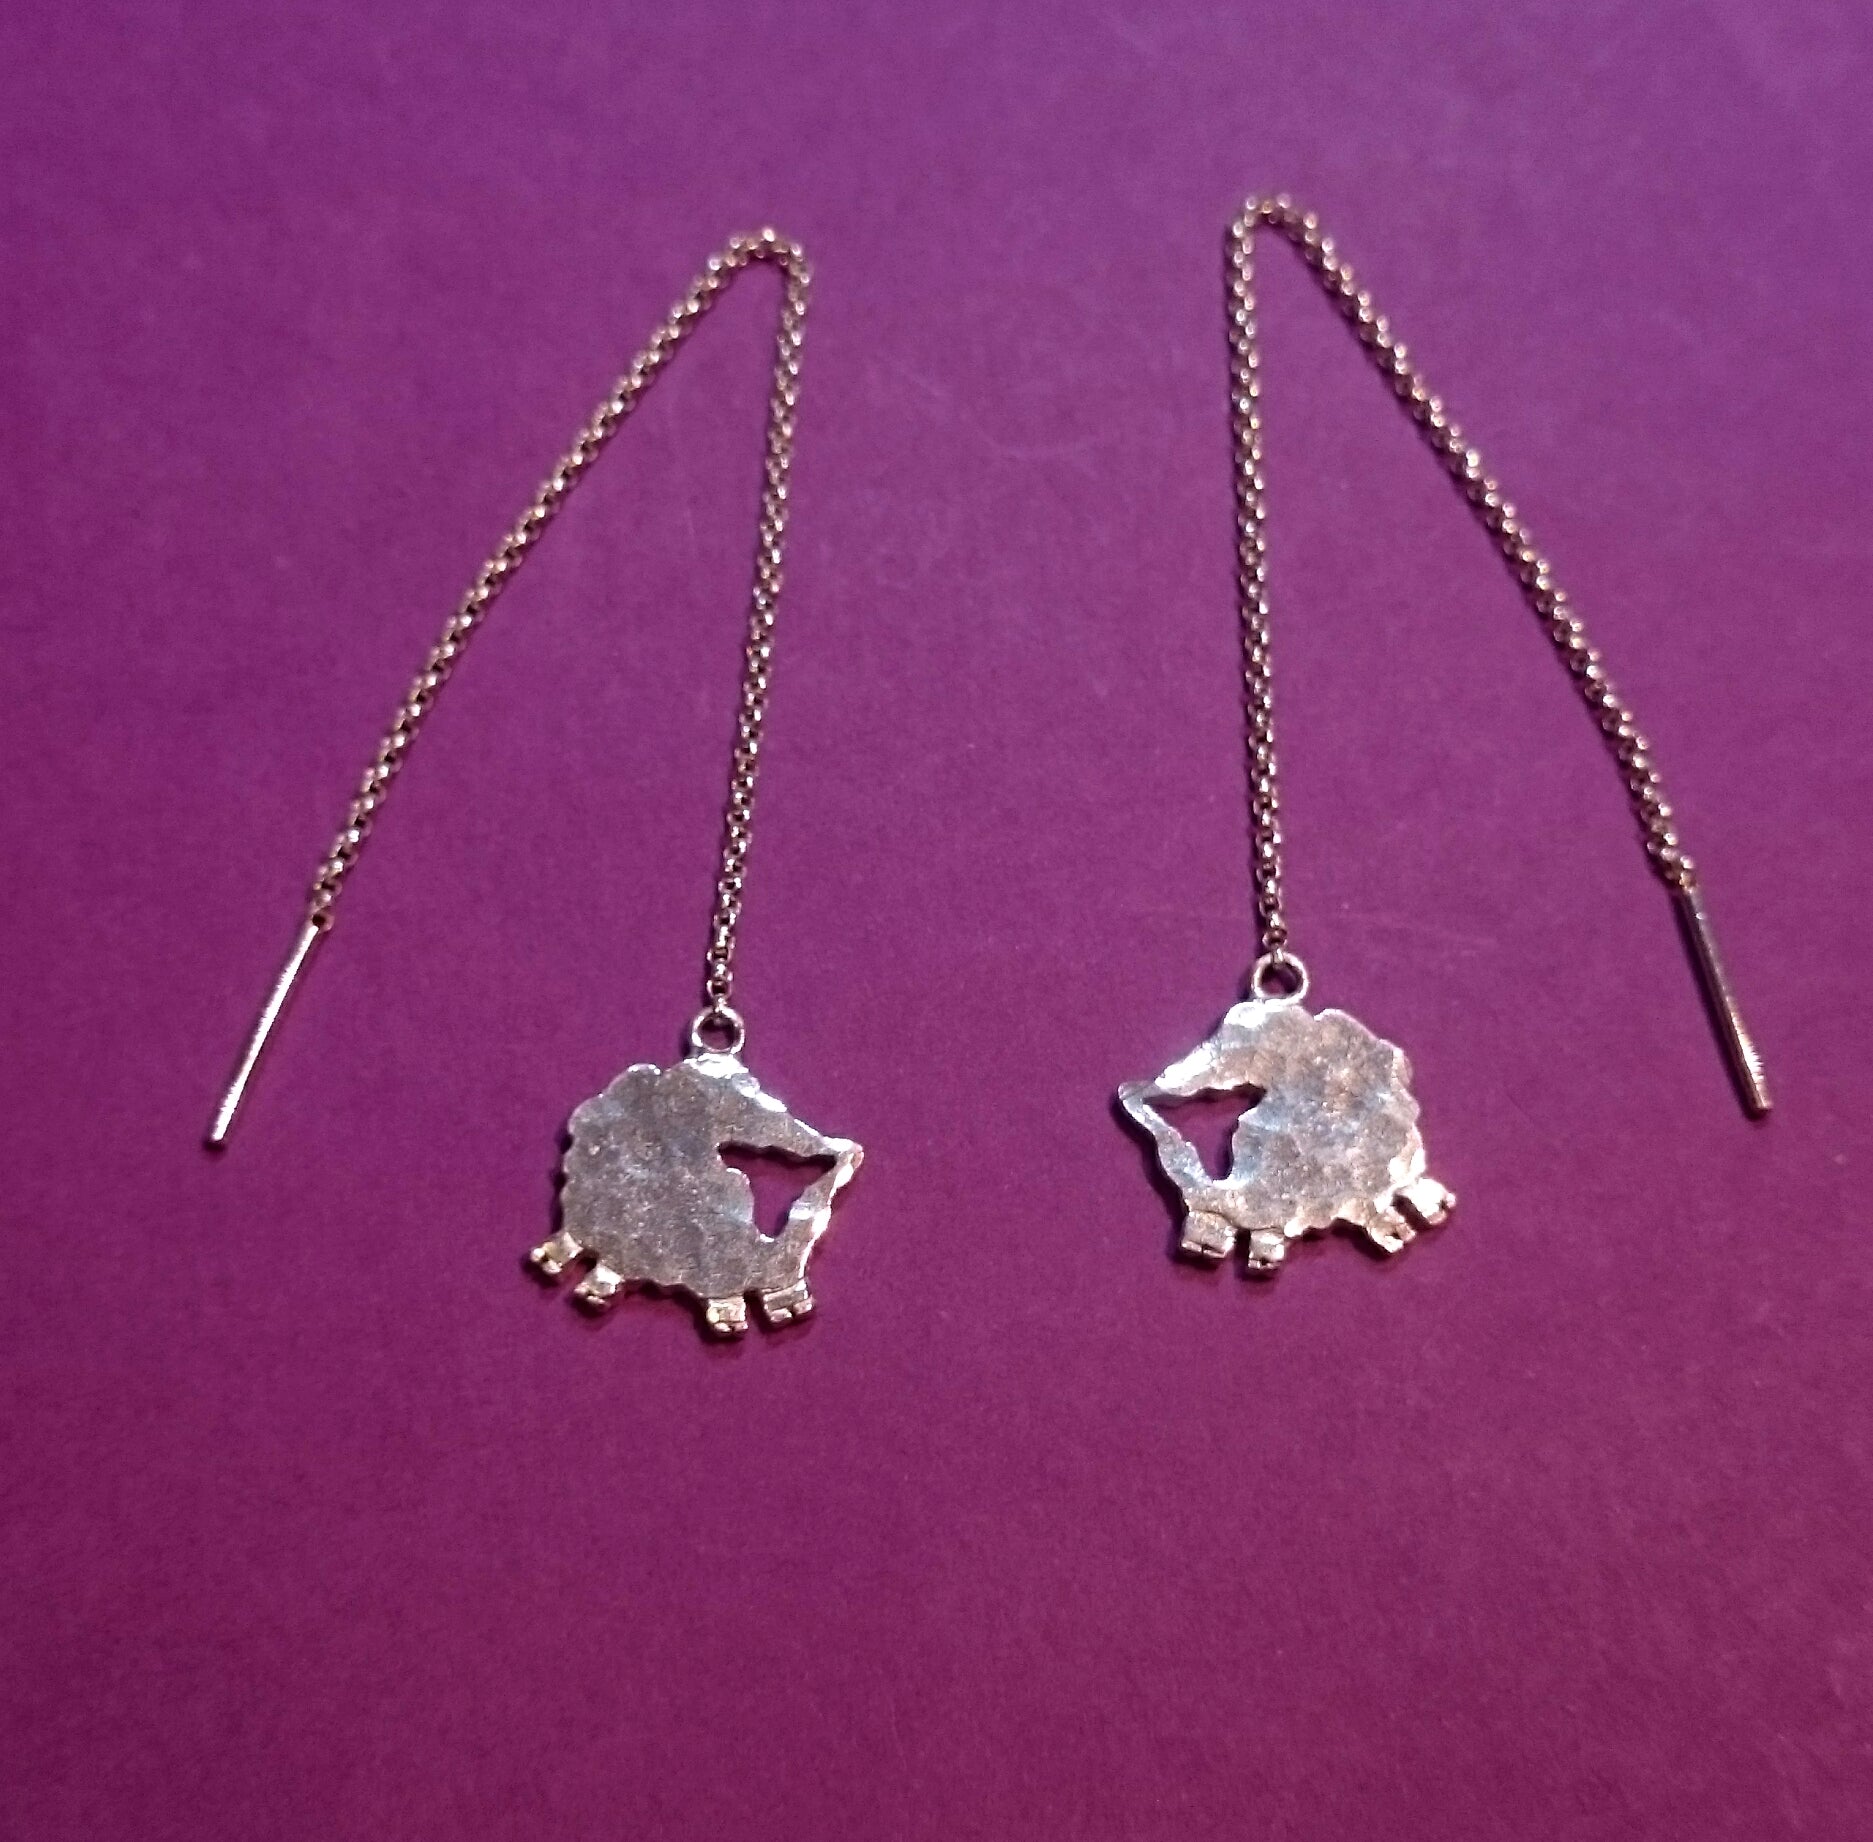 Jumping for Joy Sheep Pull Through Earrings, from Elena's Simply Sheep Jewellery Collection.